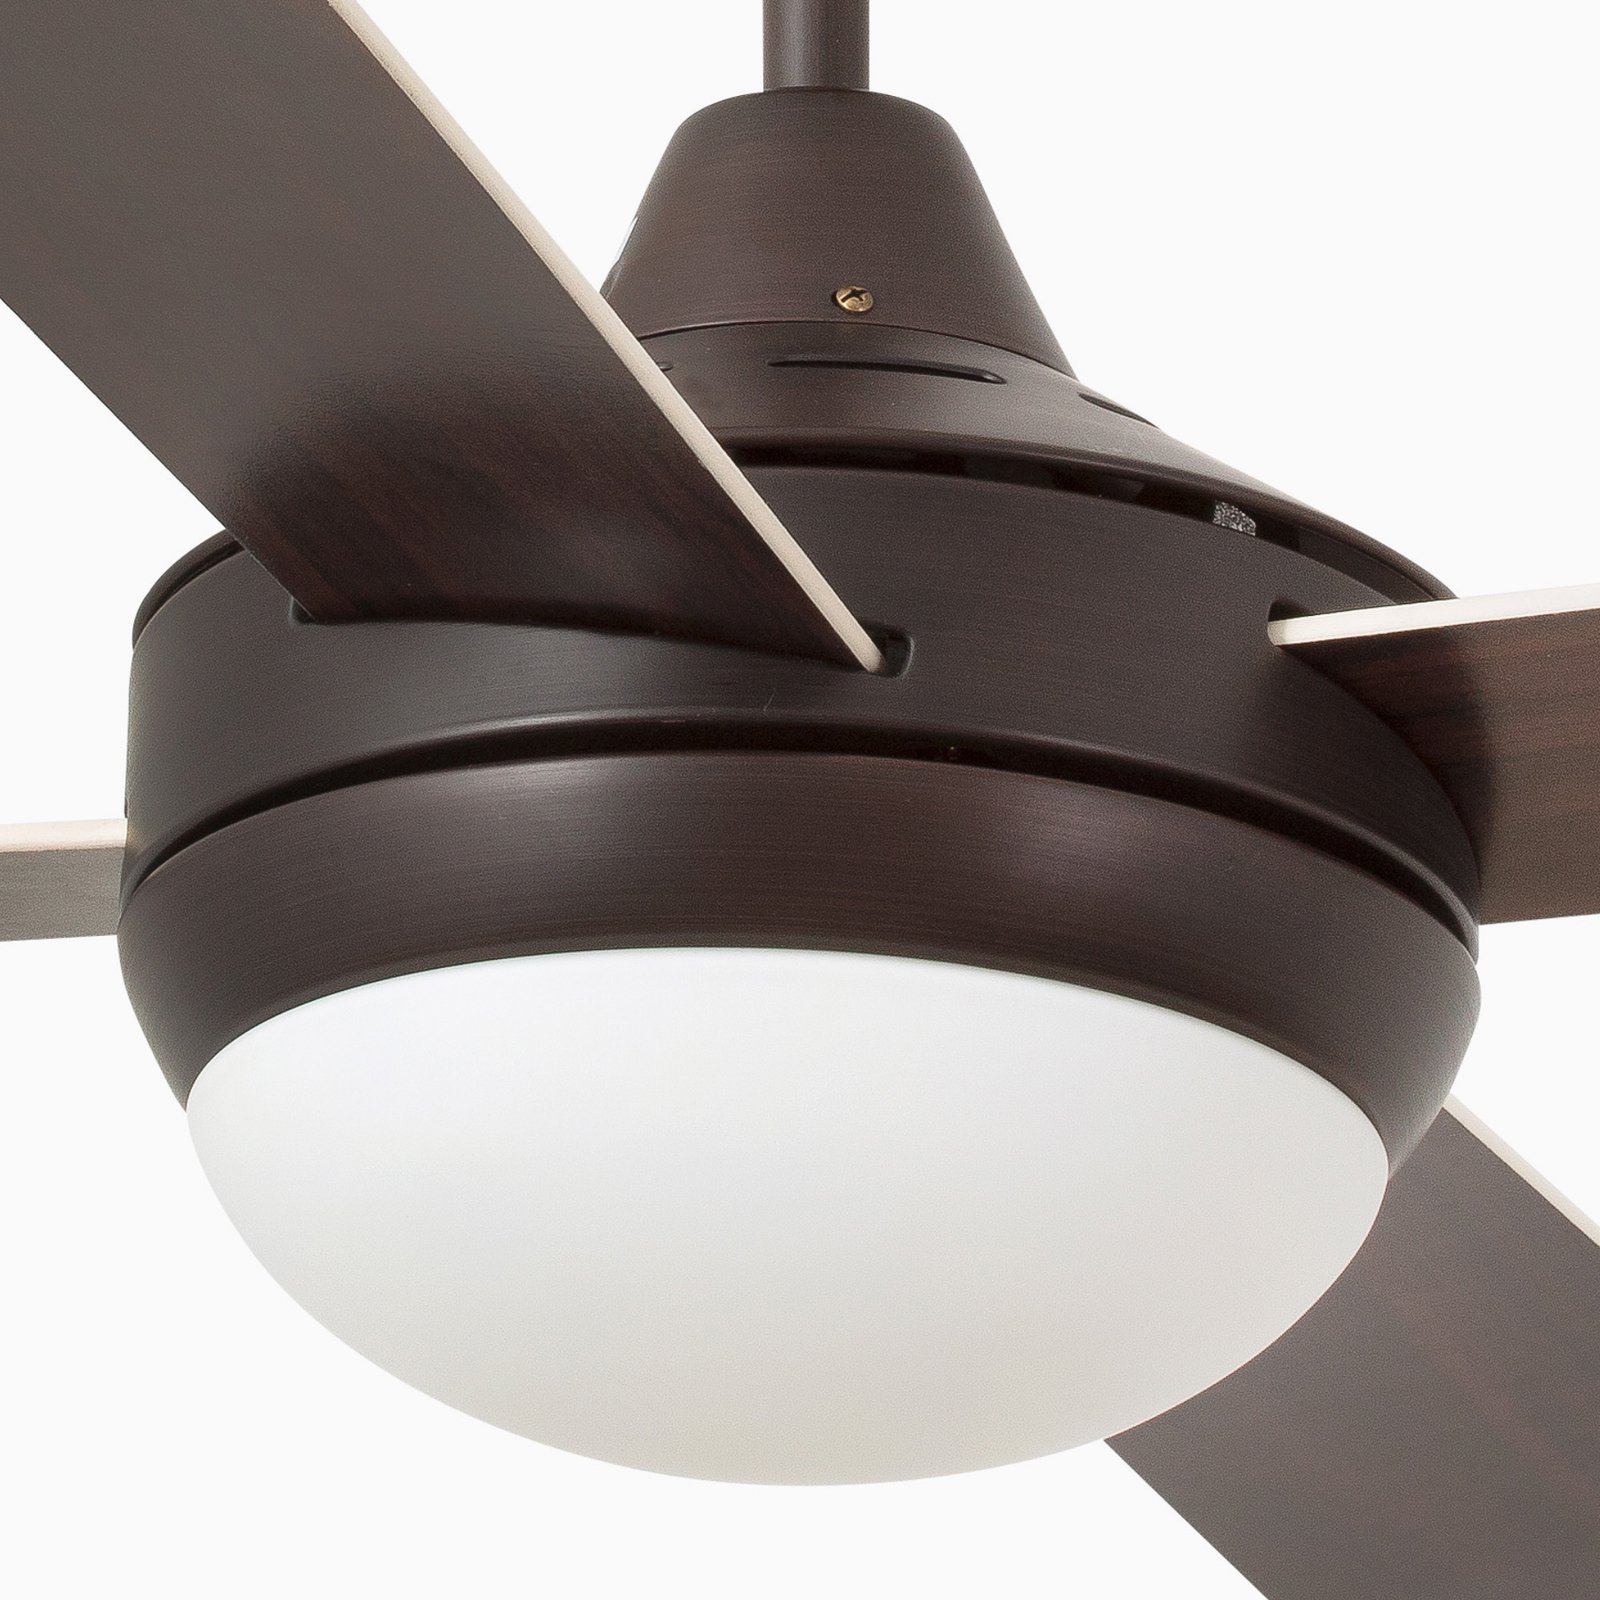 Icaria L ceiling fan with light brown/mahogany